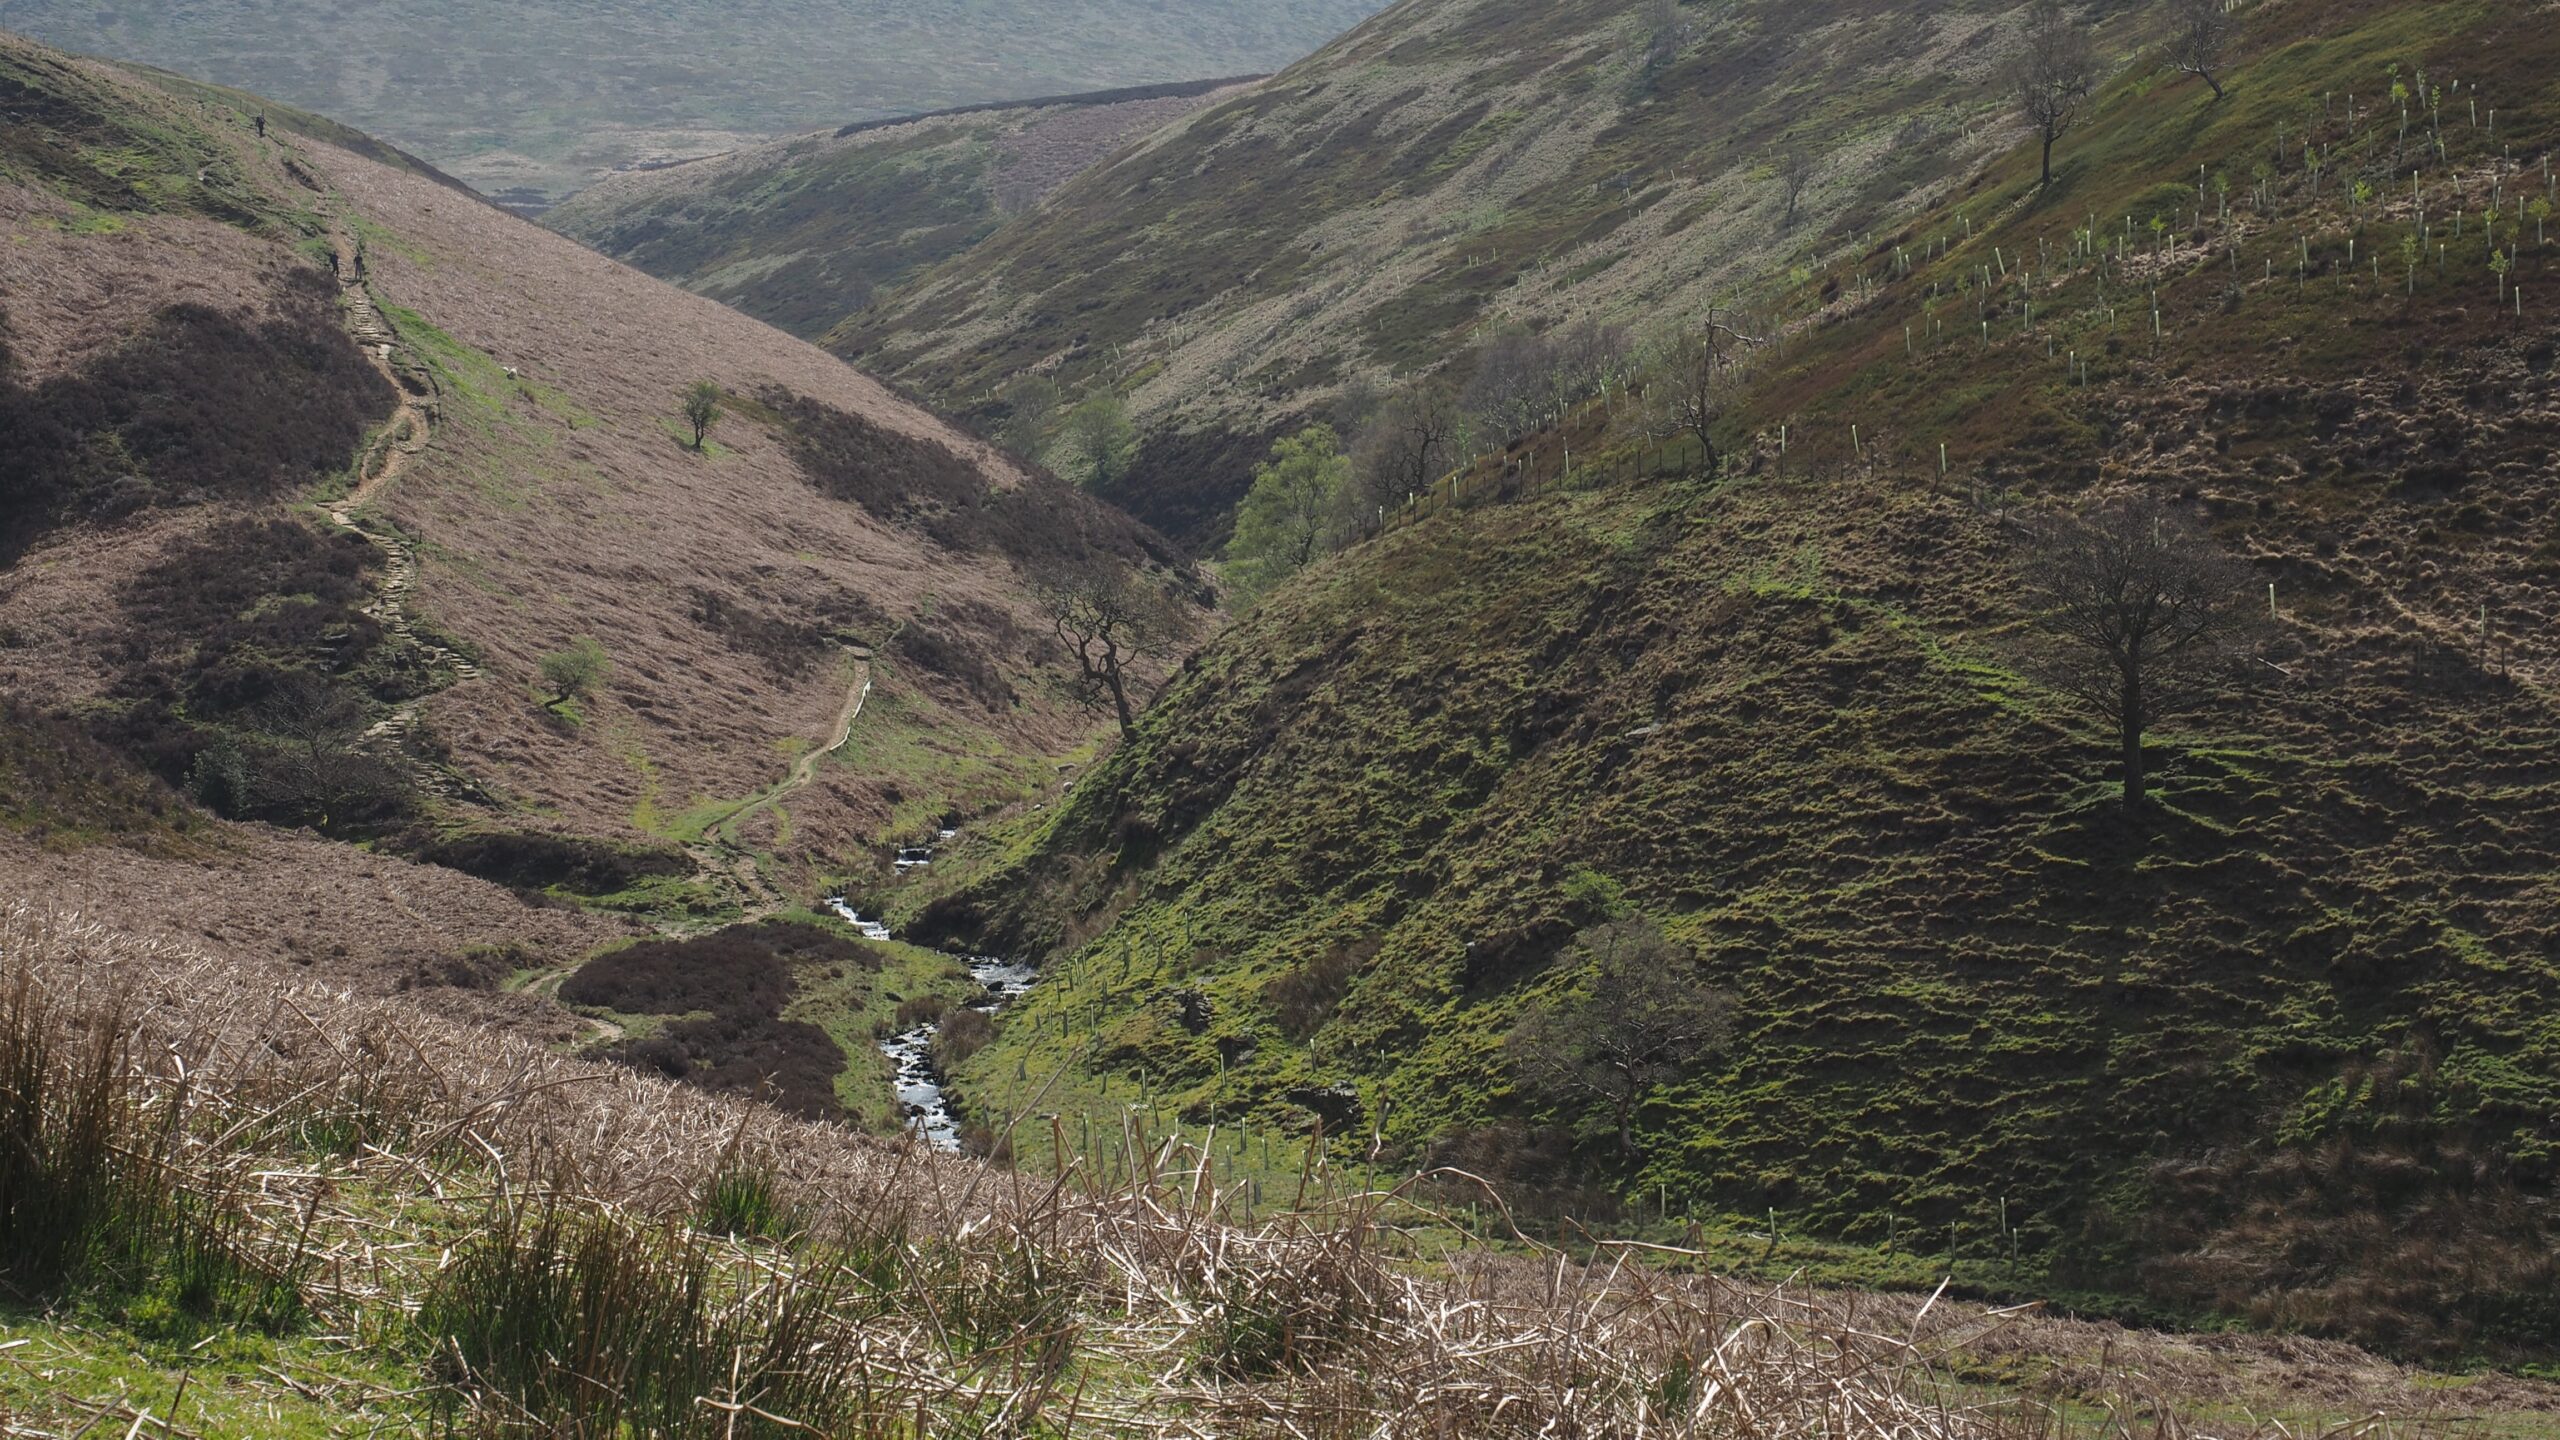 Photography of the Cut Gate bridleway dropping into Cranberry Clough in the Upper Derwent Valley